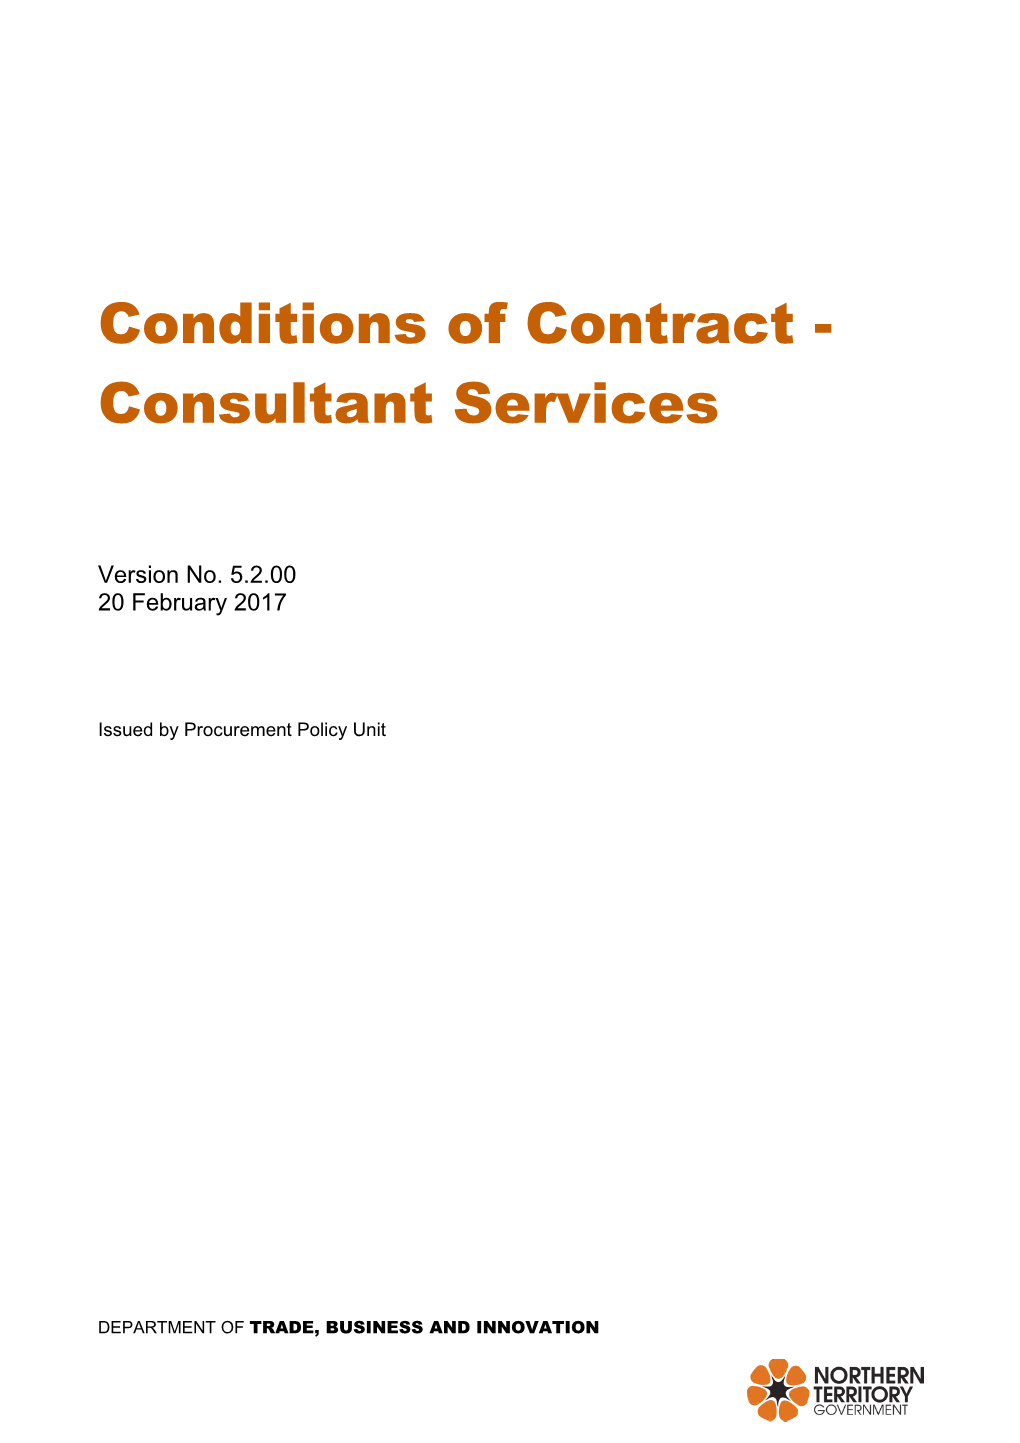 Conditions of Contract - Consultant Services